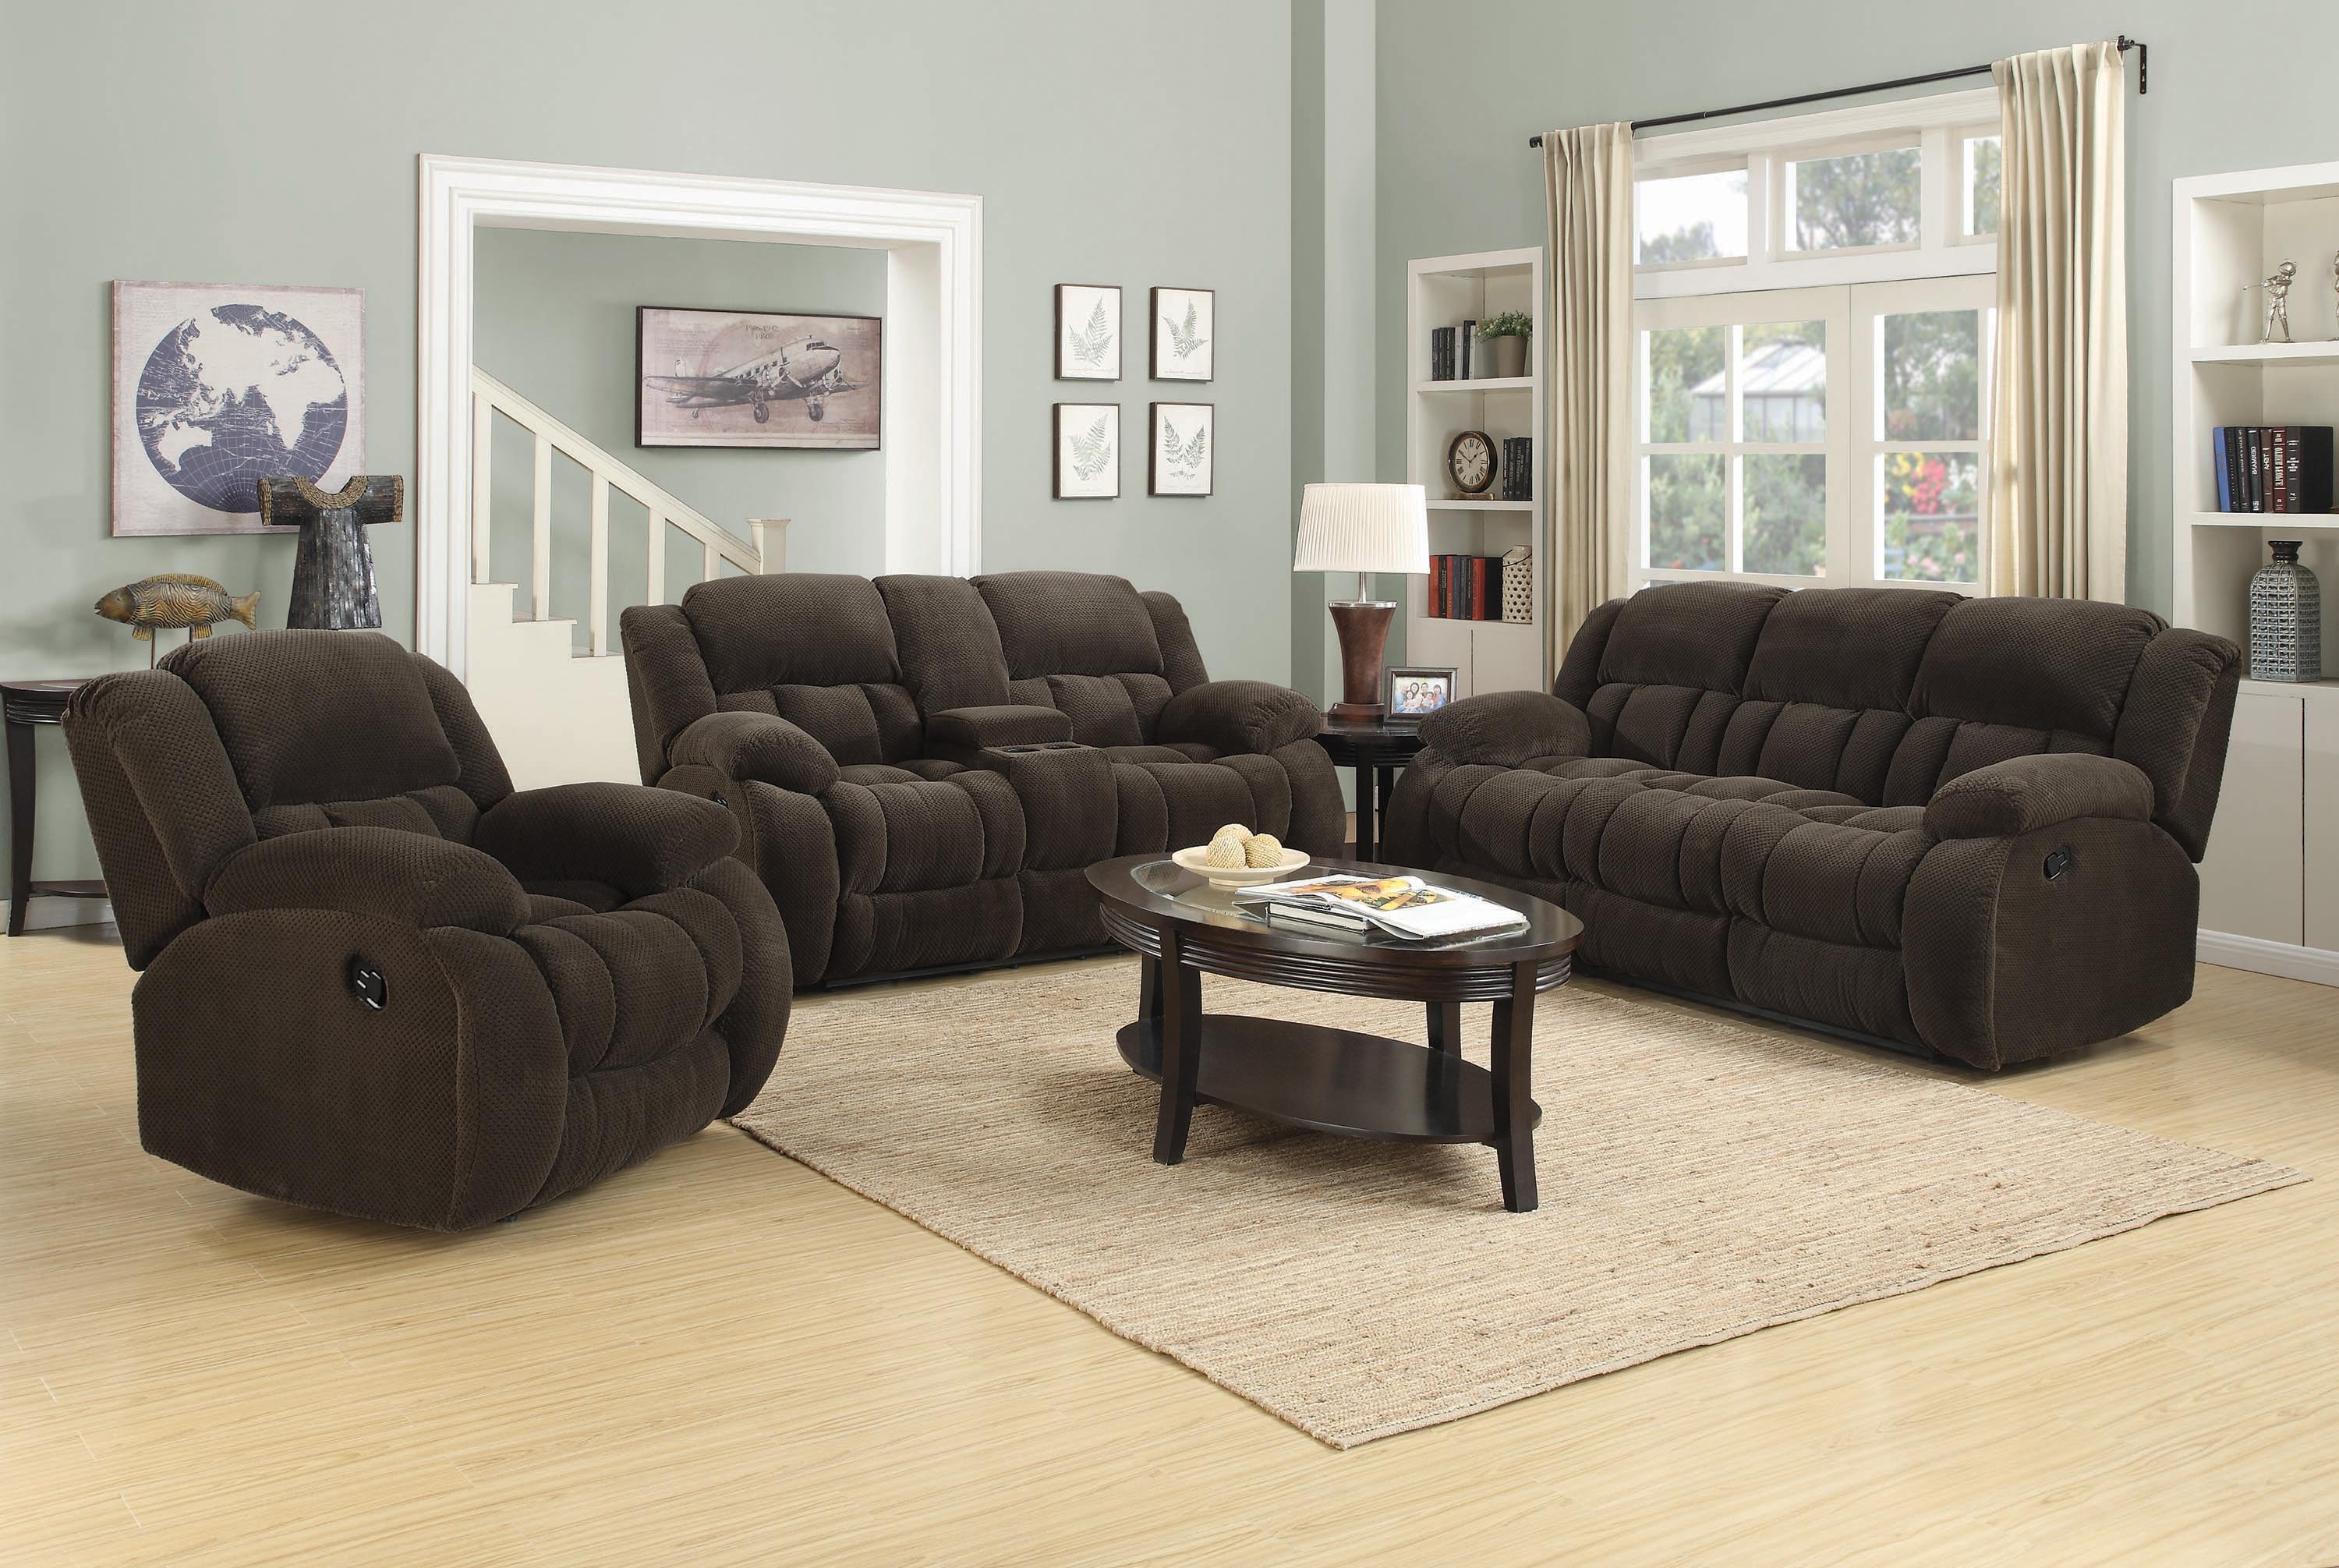 Contemporary Living Room Set 601924-S2 Weissman 601924-S2 in Chocolate 